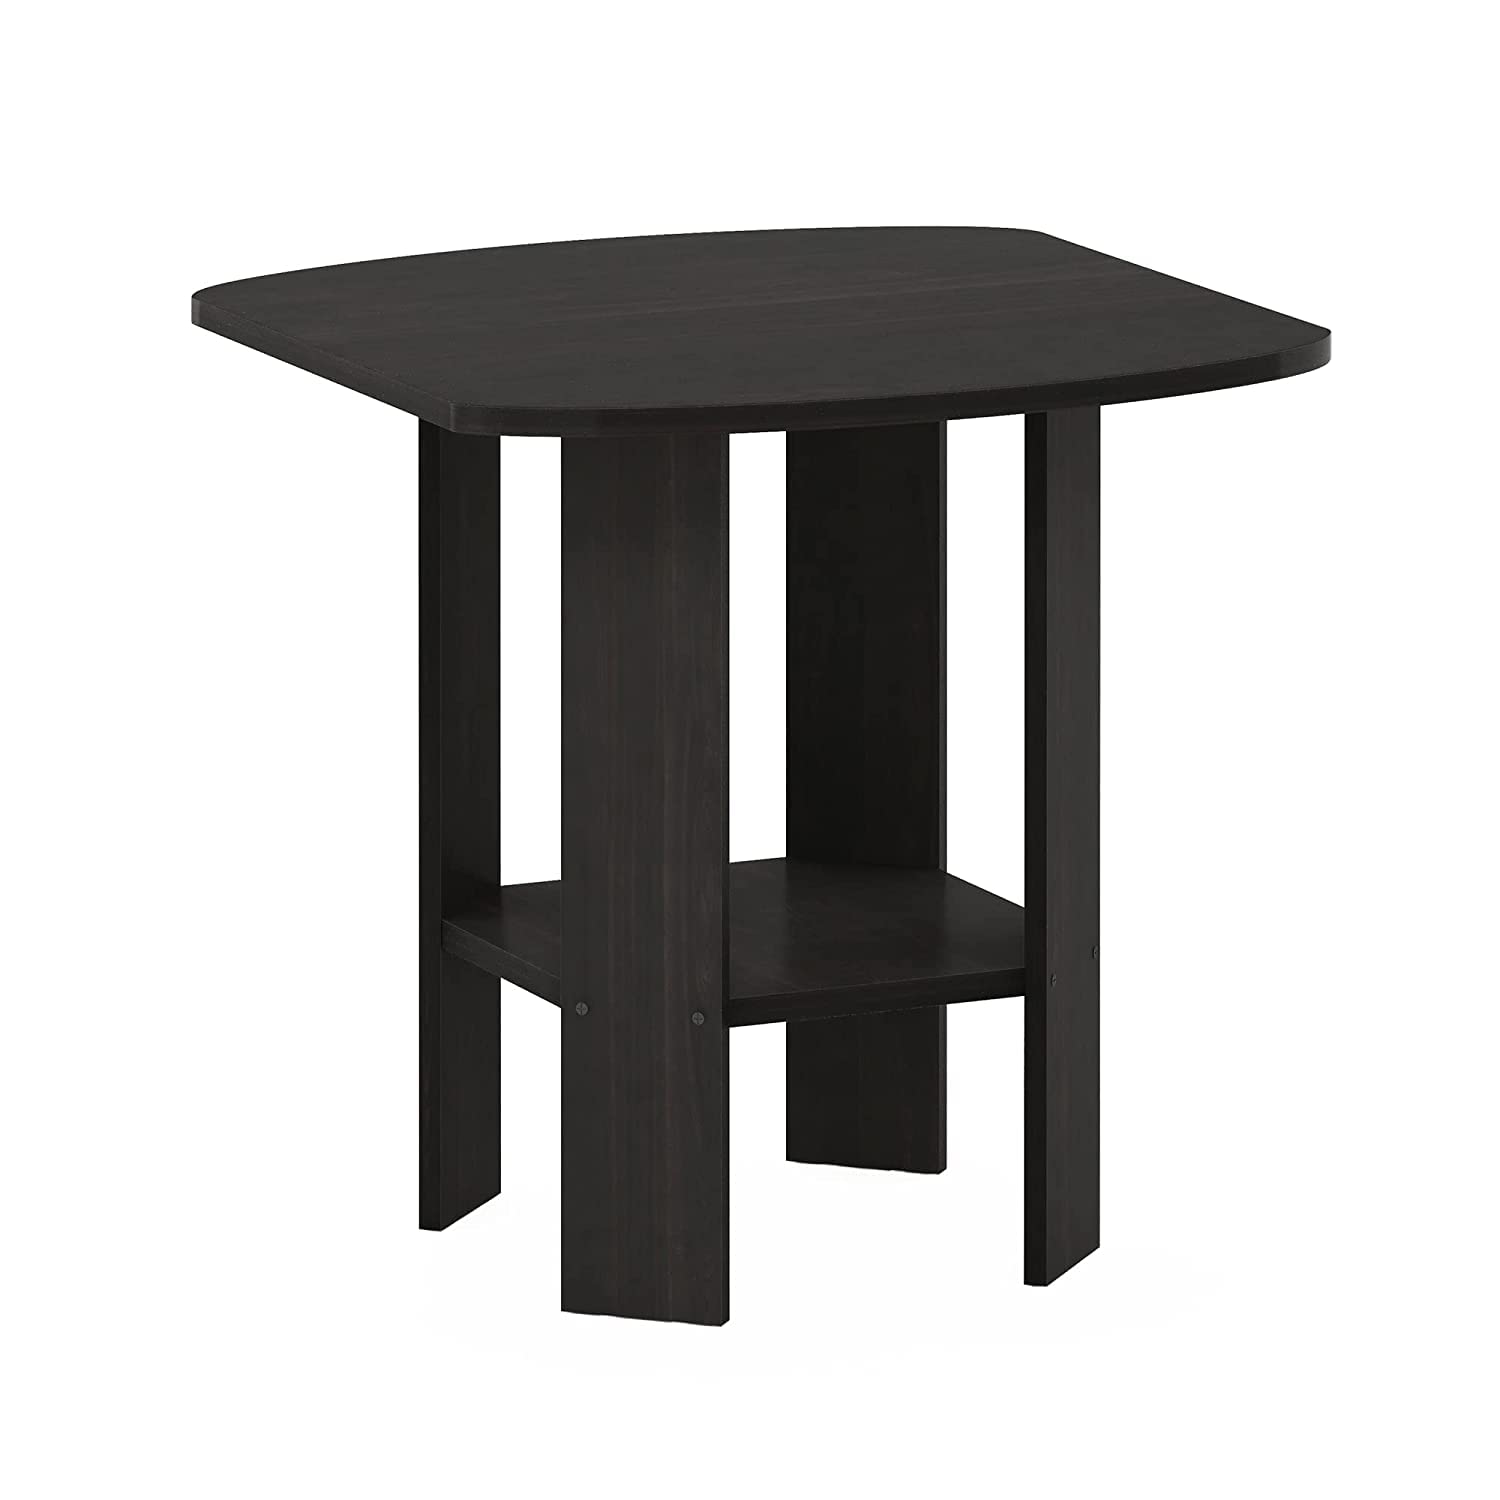 Furinno Simple Design End/SideTable (Espresso) $10.86 + Free Shipping w/ Prime or on $25+